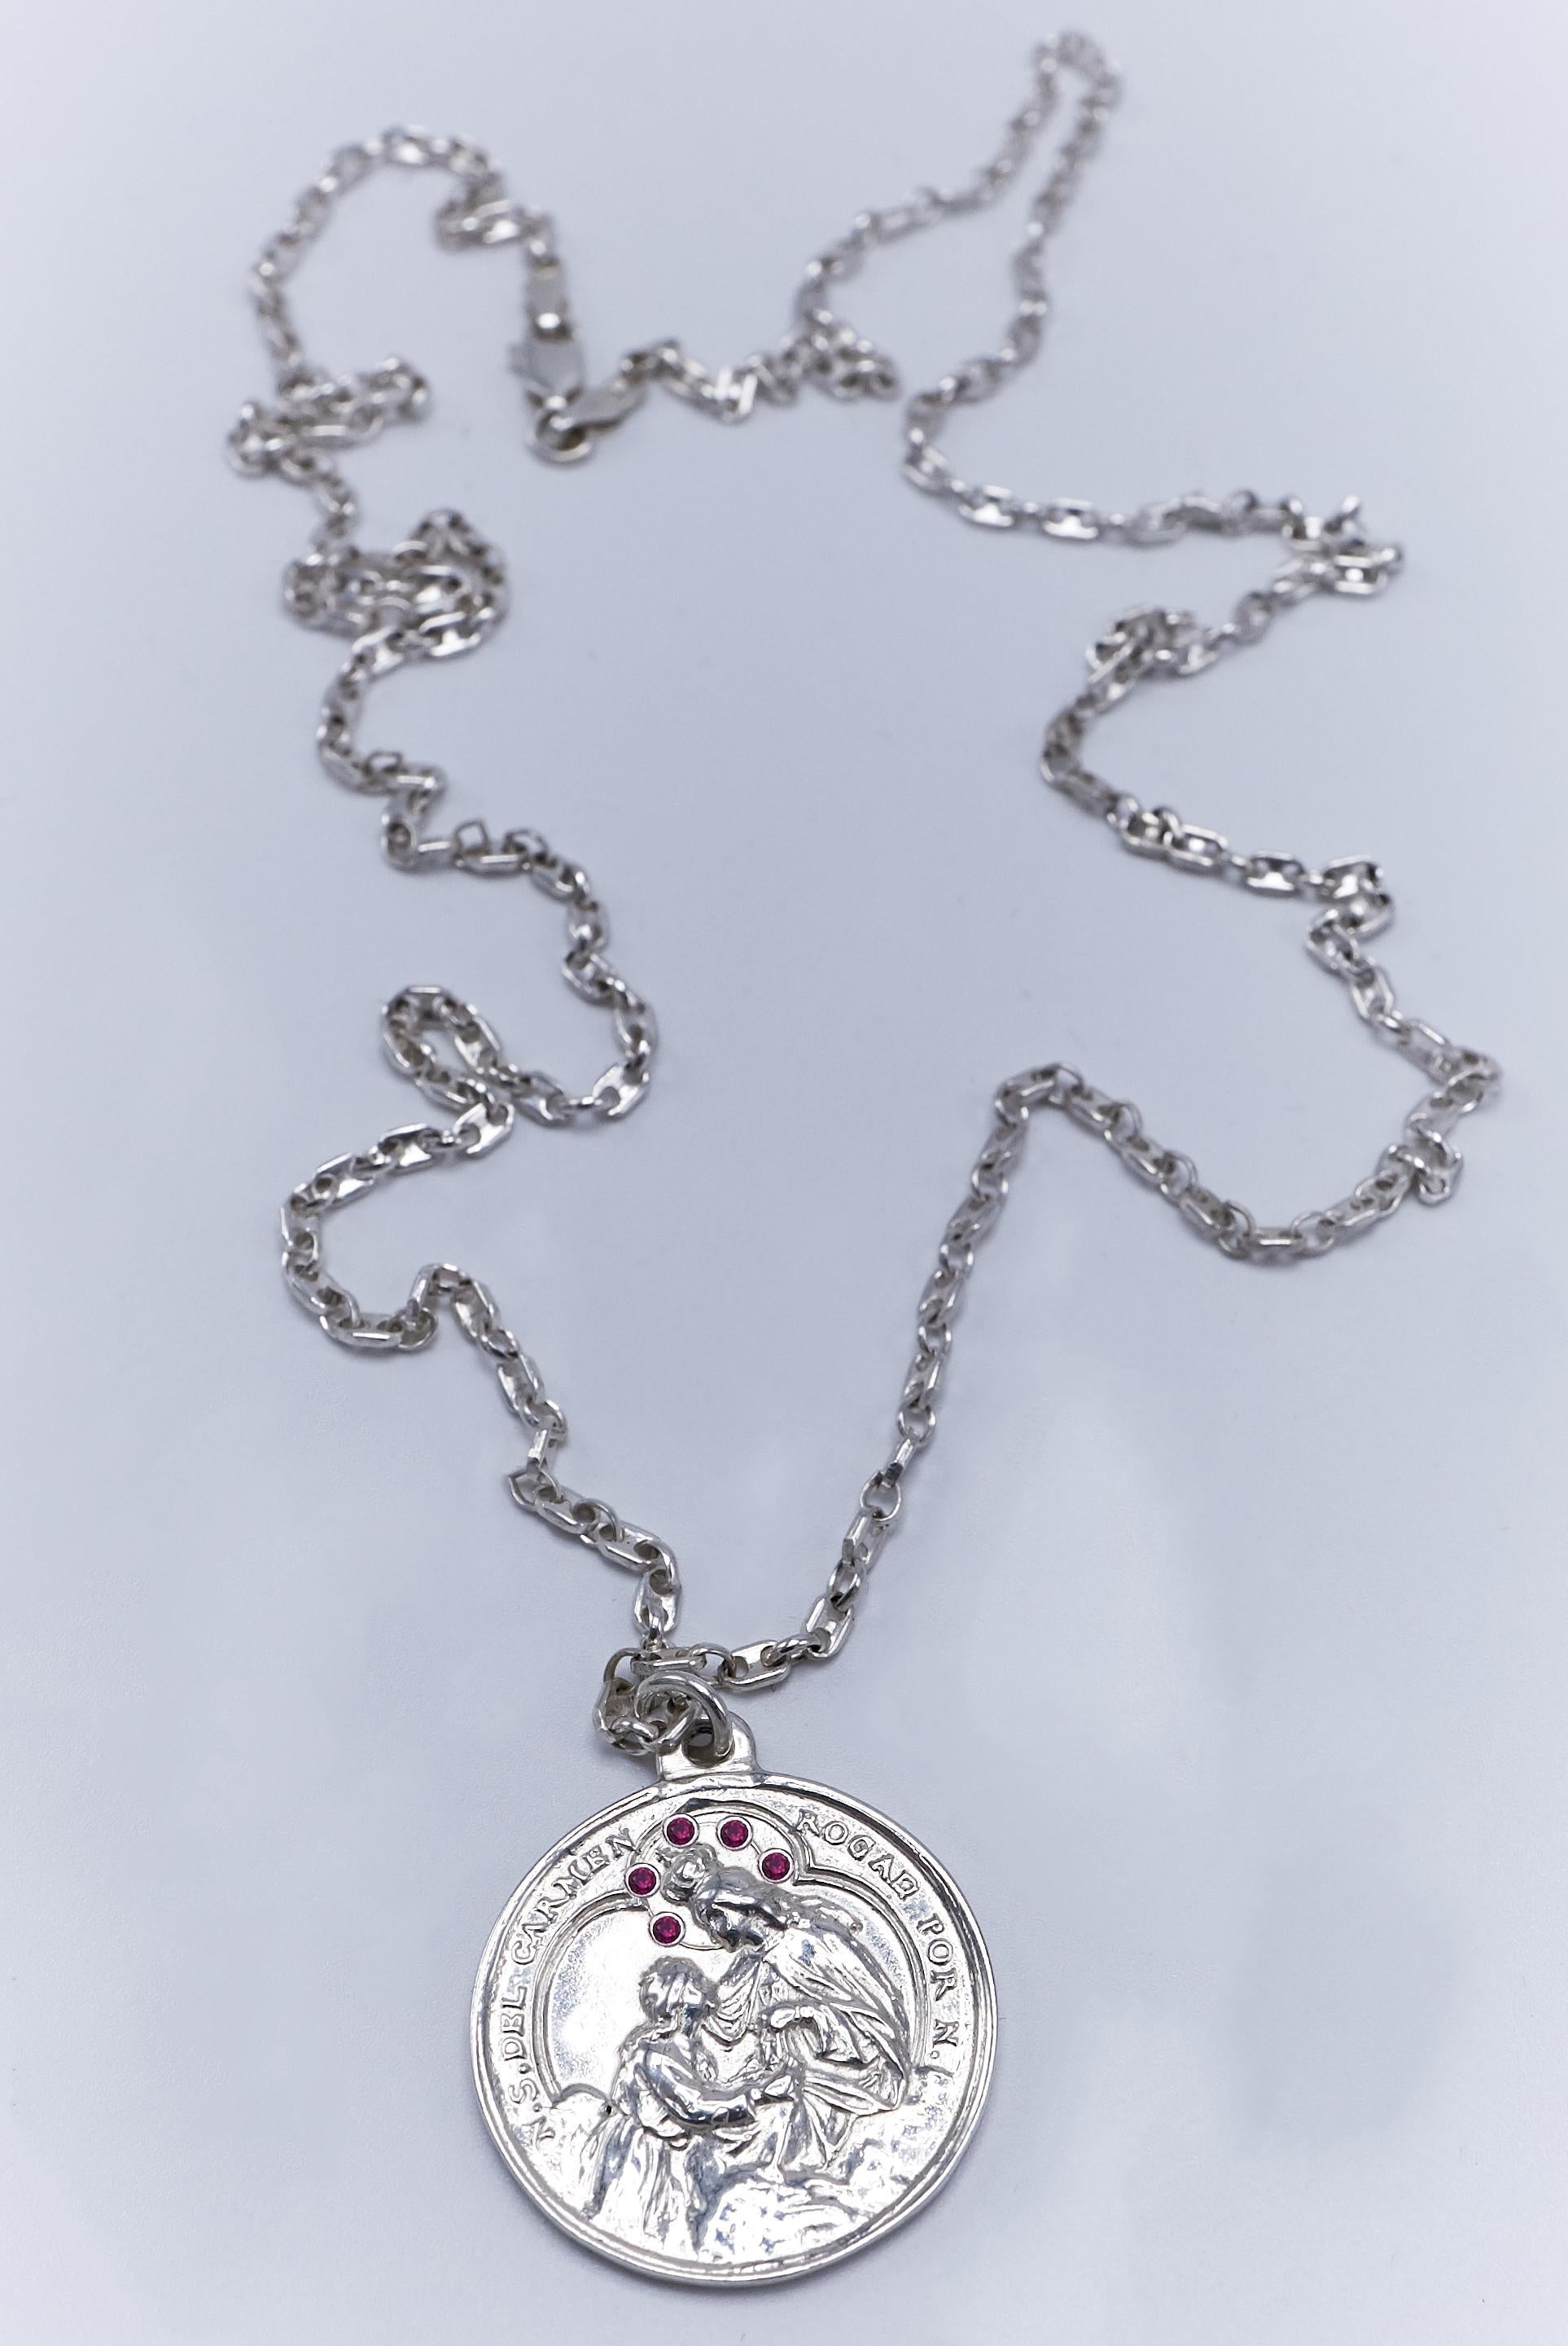 Contemporary Medal Chain Necklace Miraculous Virgin Mary Ruby Silver J Dauphin